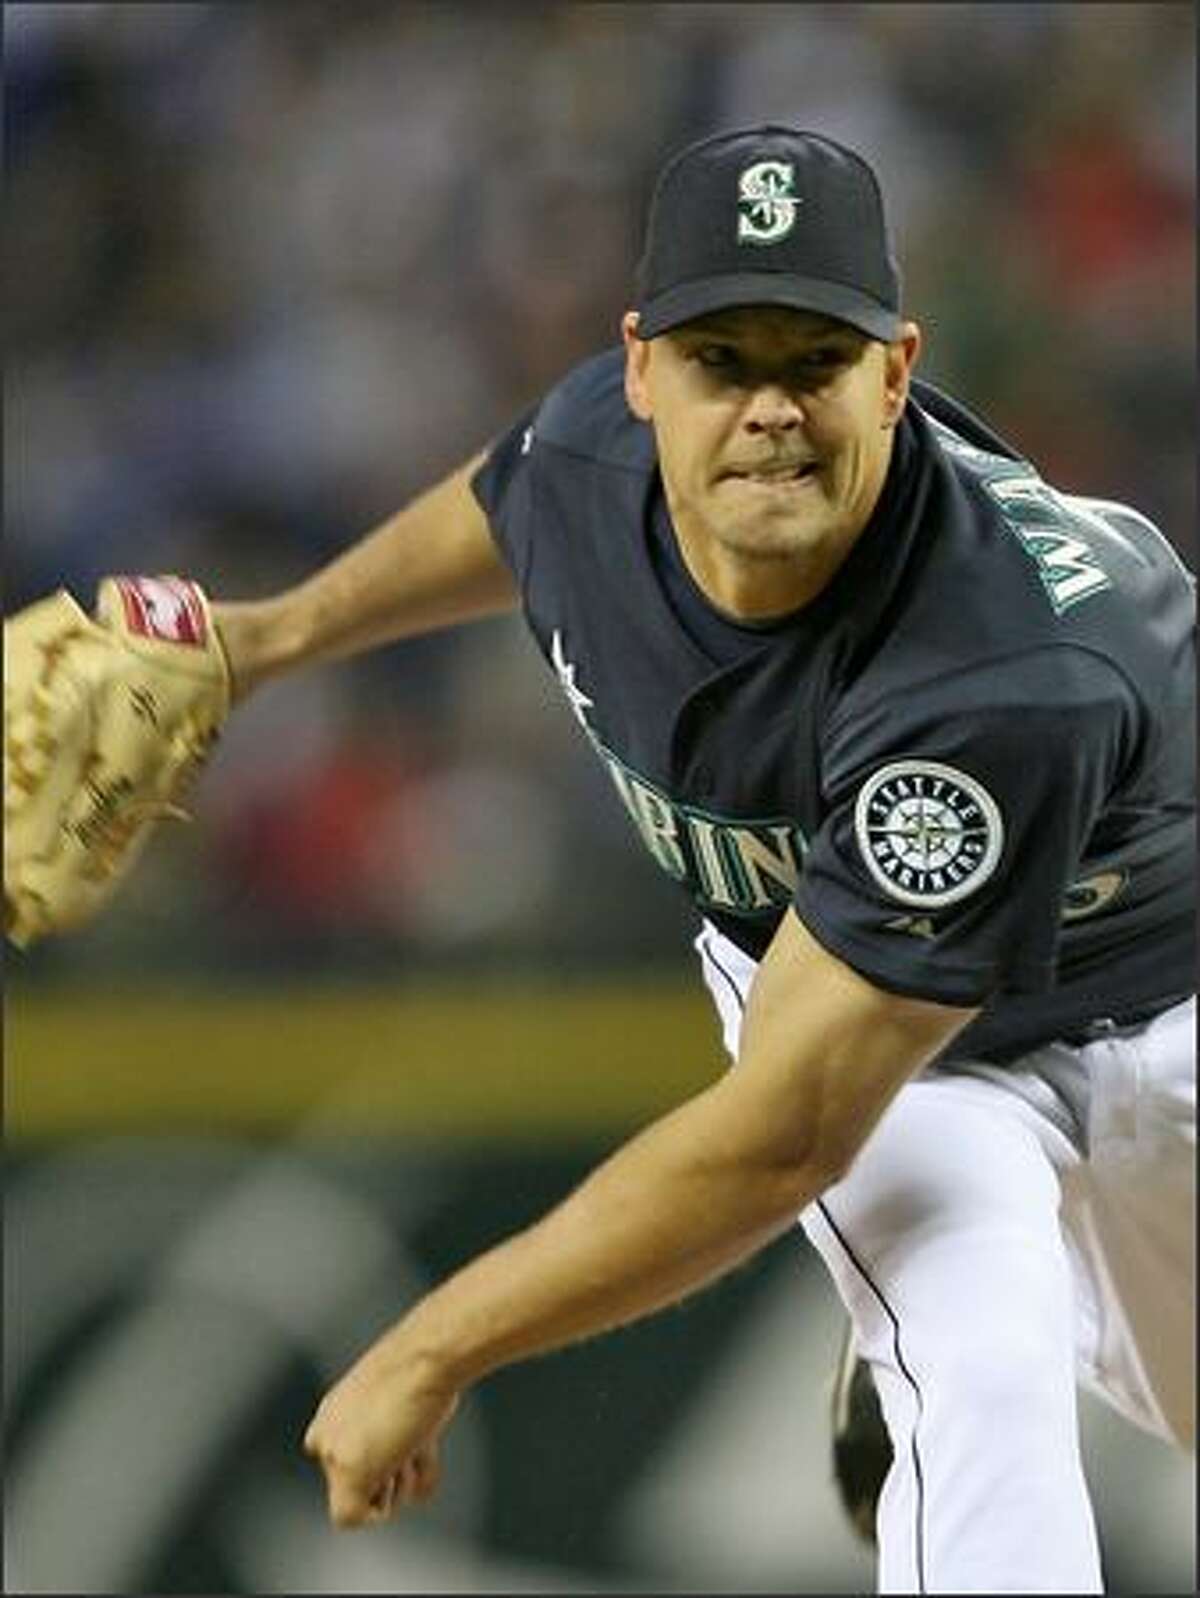 Mariners starter Jarrod Washburn pitches against the New York Yankees during the seventh inning. He held the Yankees scoreless for eight innings to win 3-0.